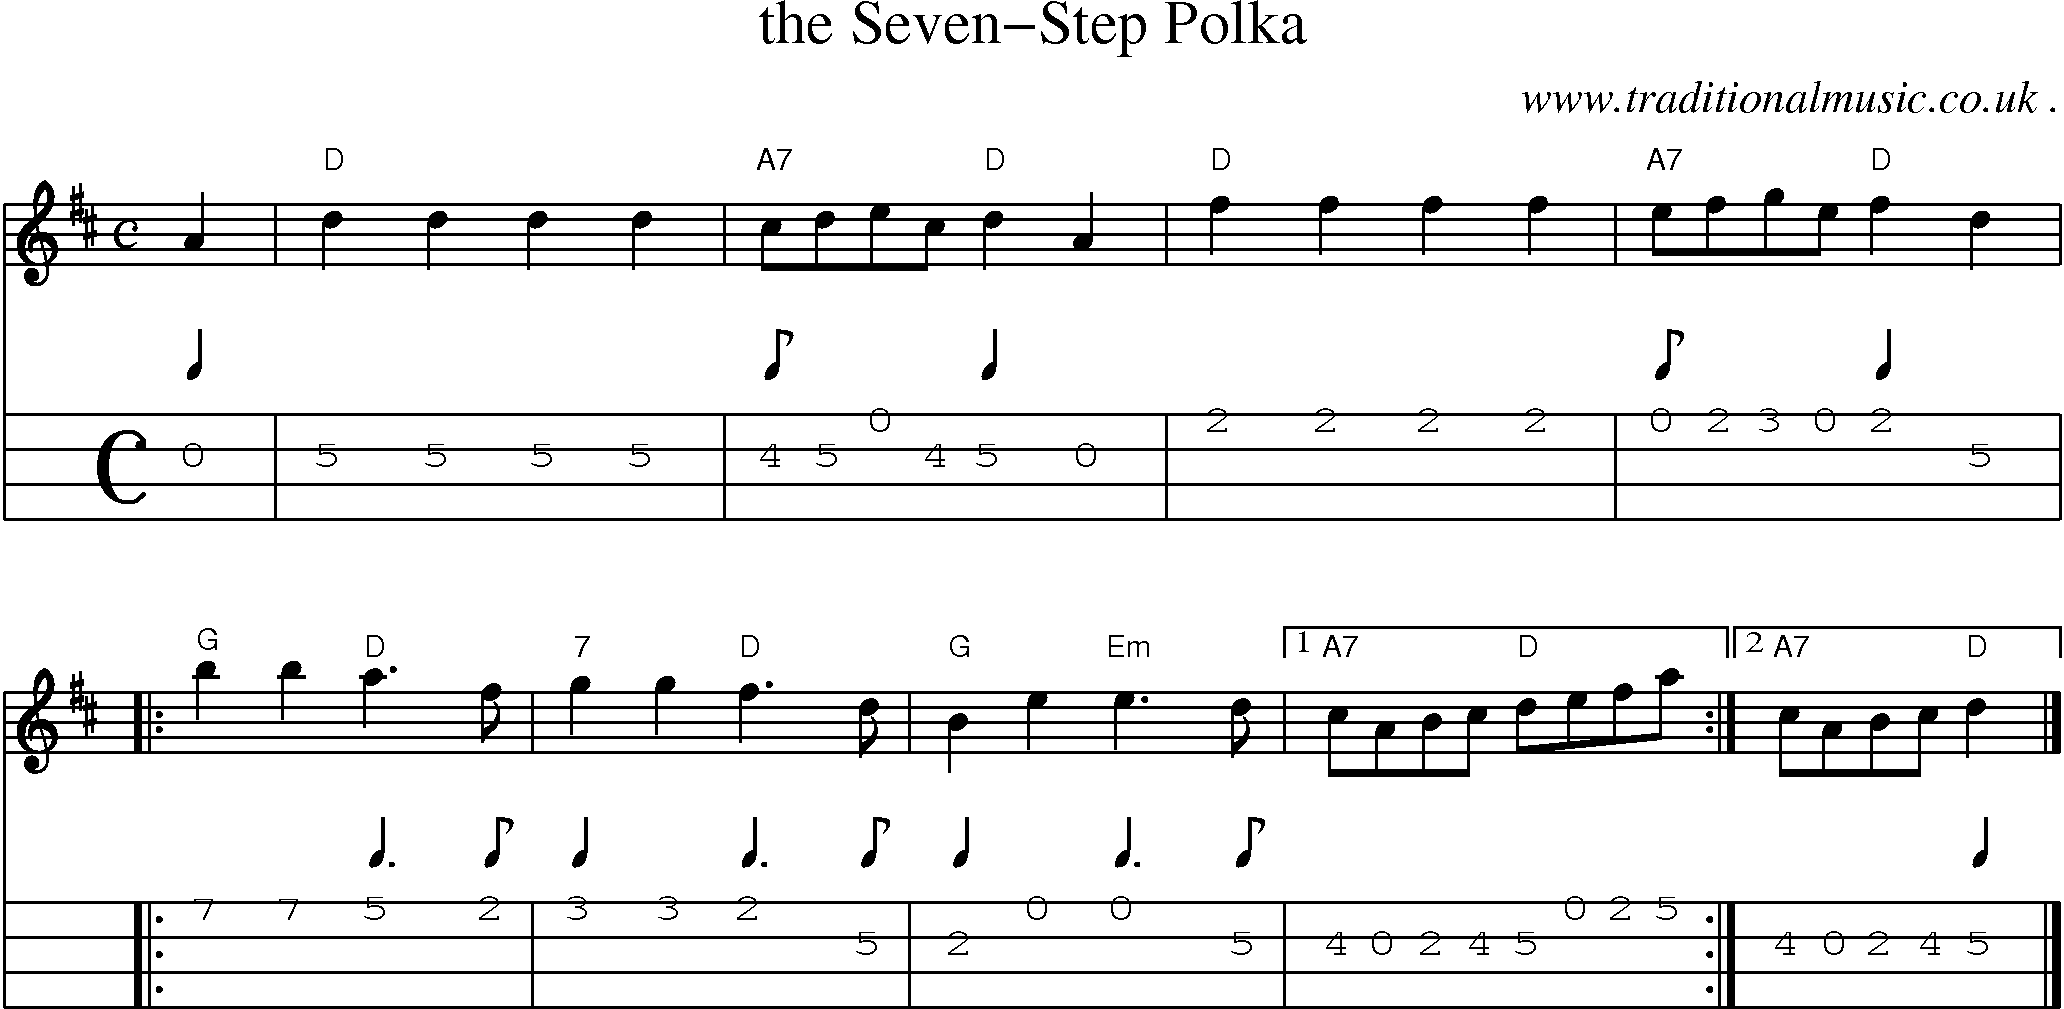 Sheet-music  score, Chords and Mandolin Tabs for The Seven-step Polka